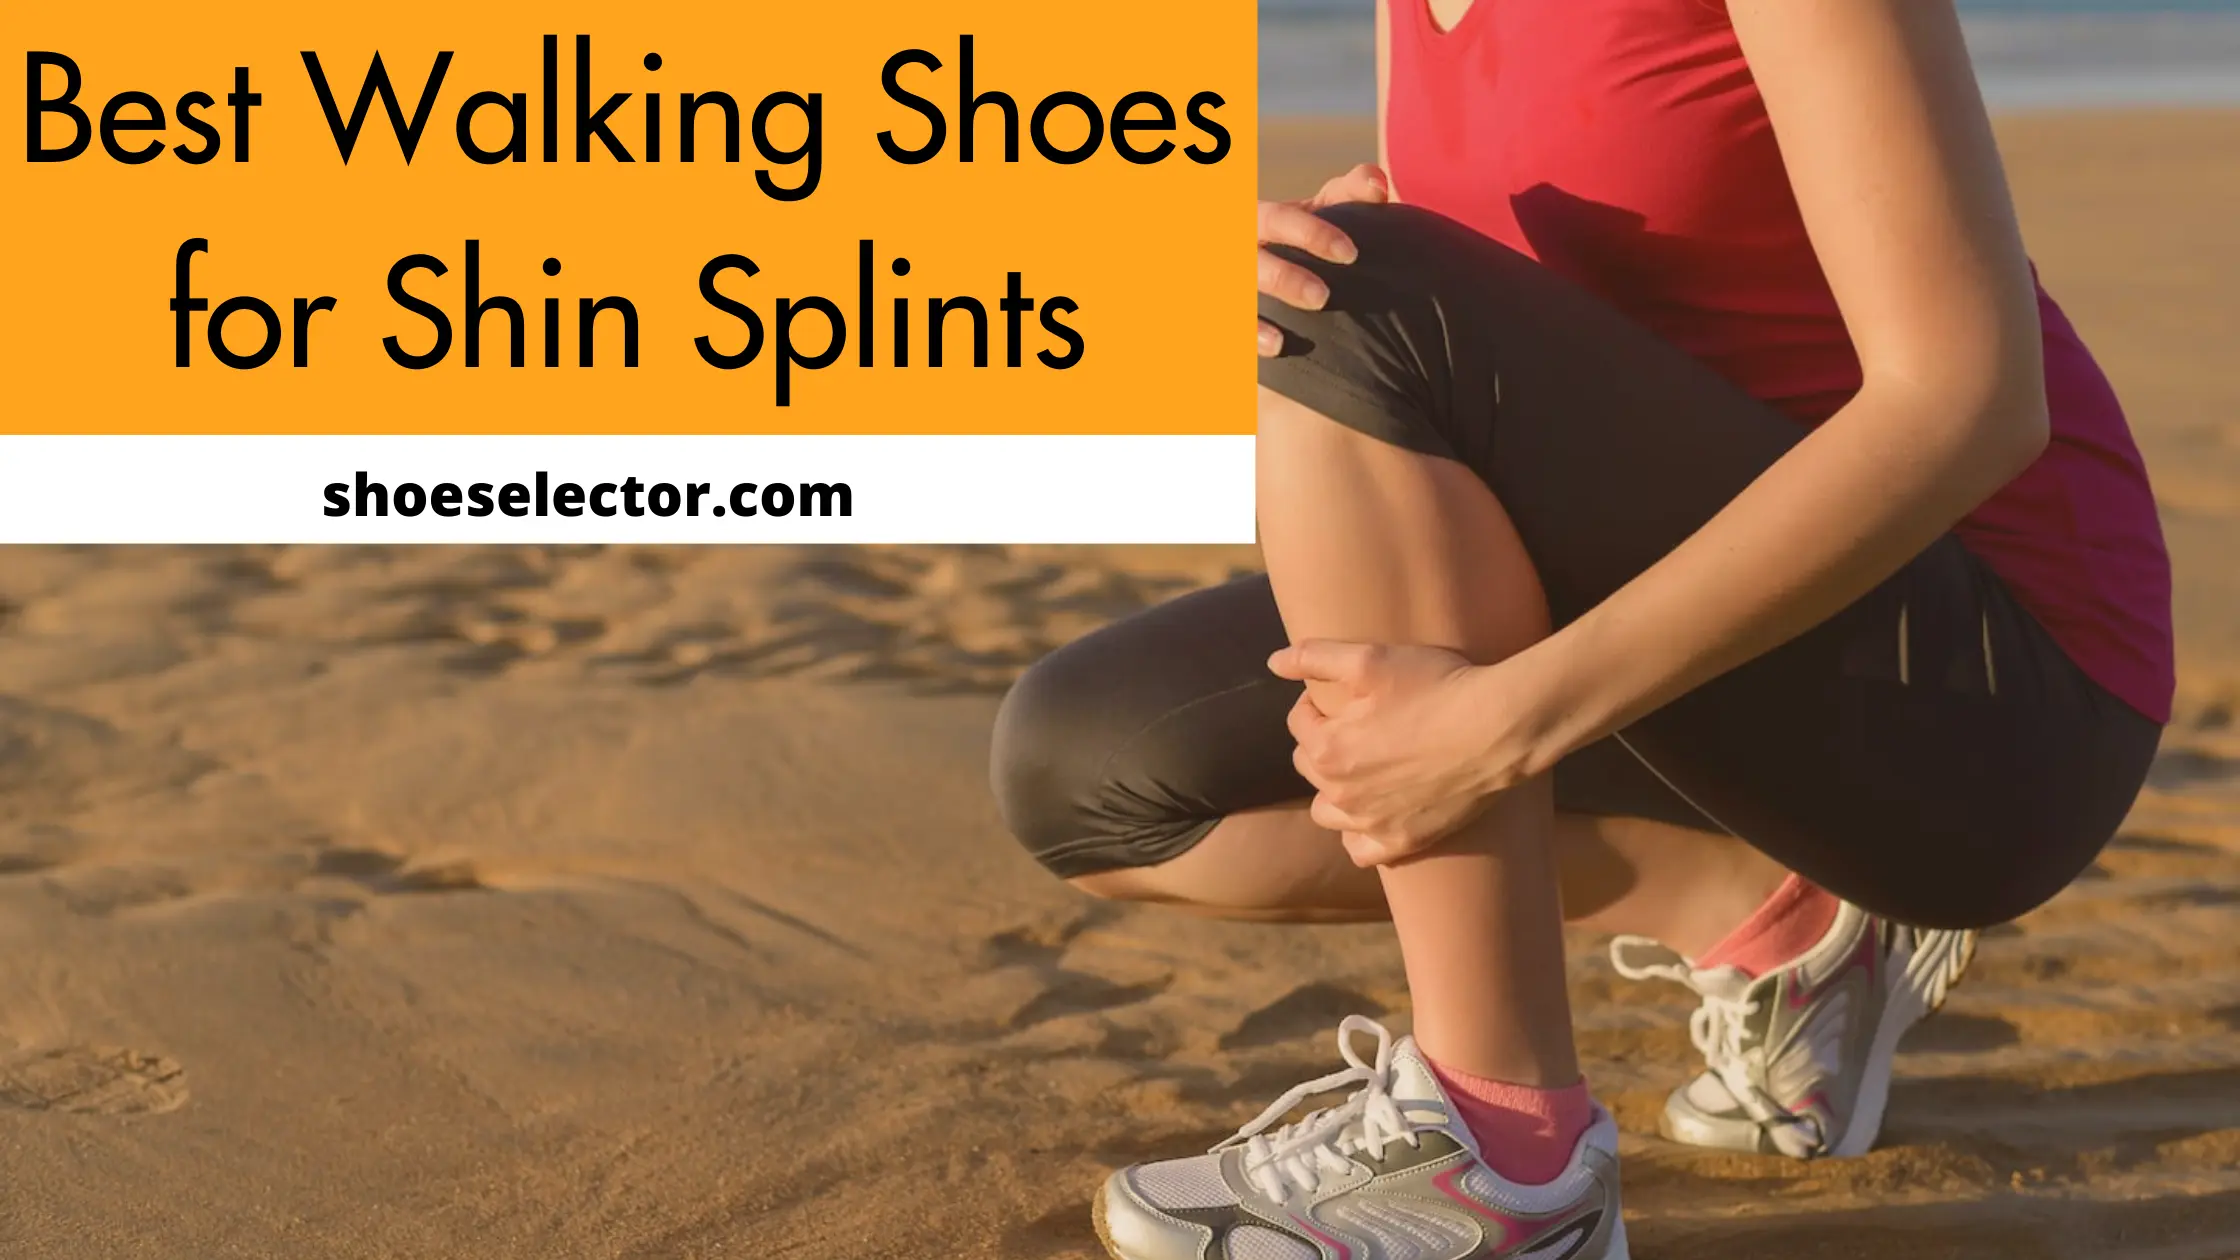 Best Walking Shoes For Shin Splints - Complete Buying Guides